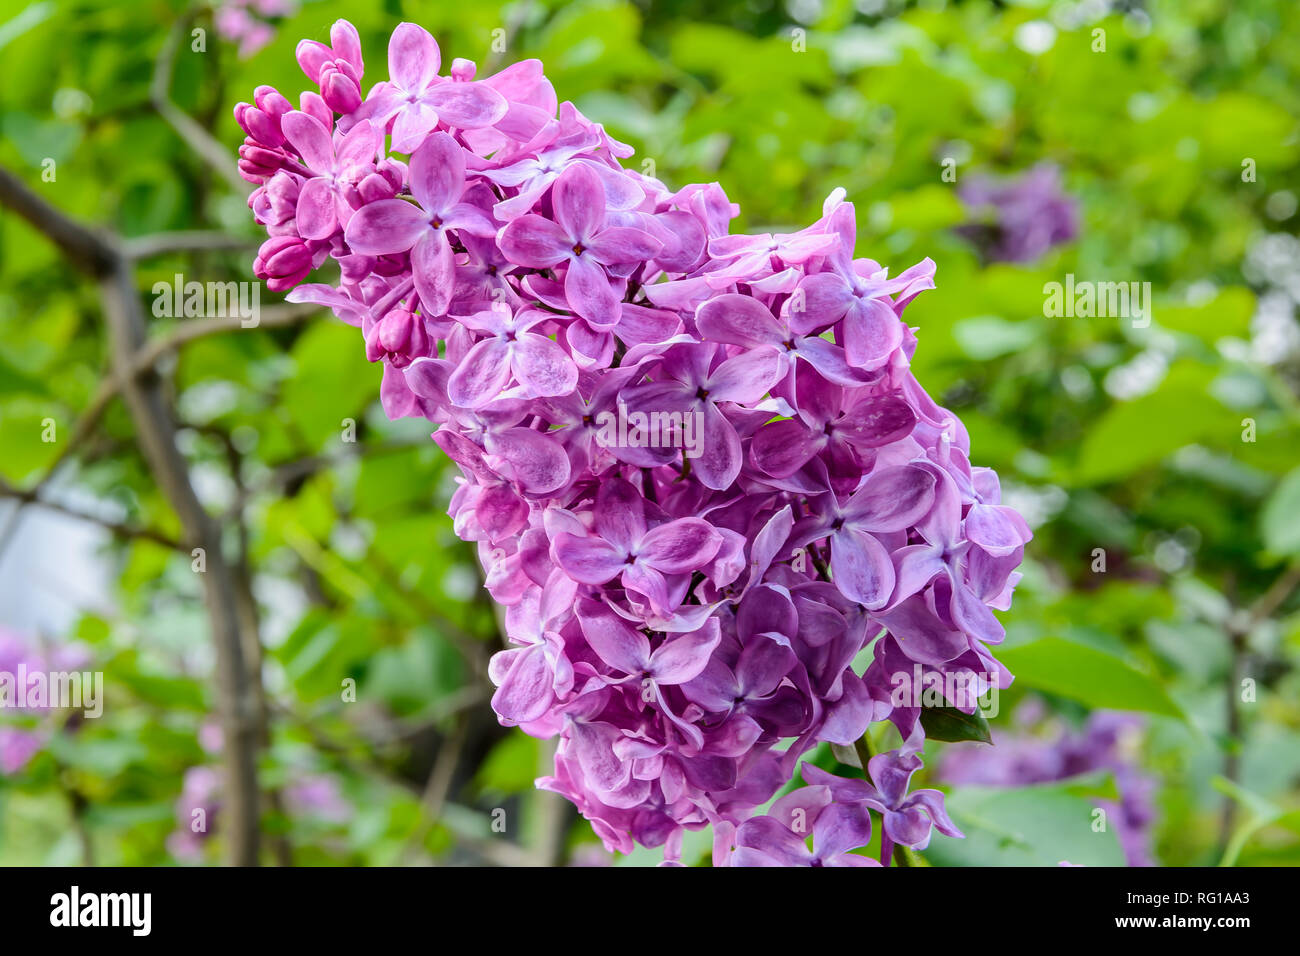 Lilac flowers on a bush branch Stock Photo